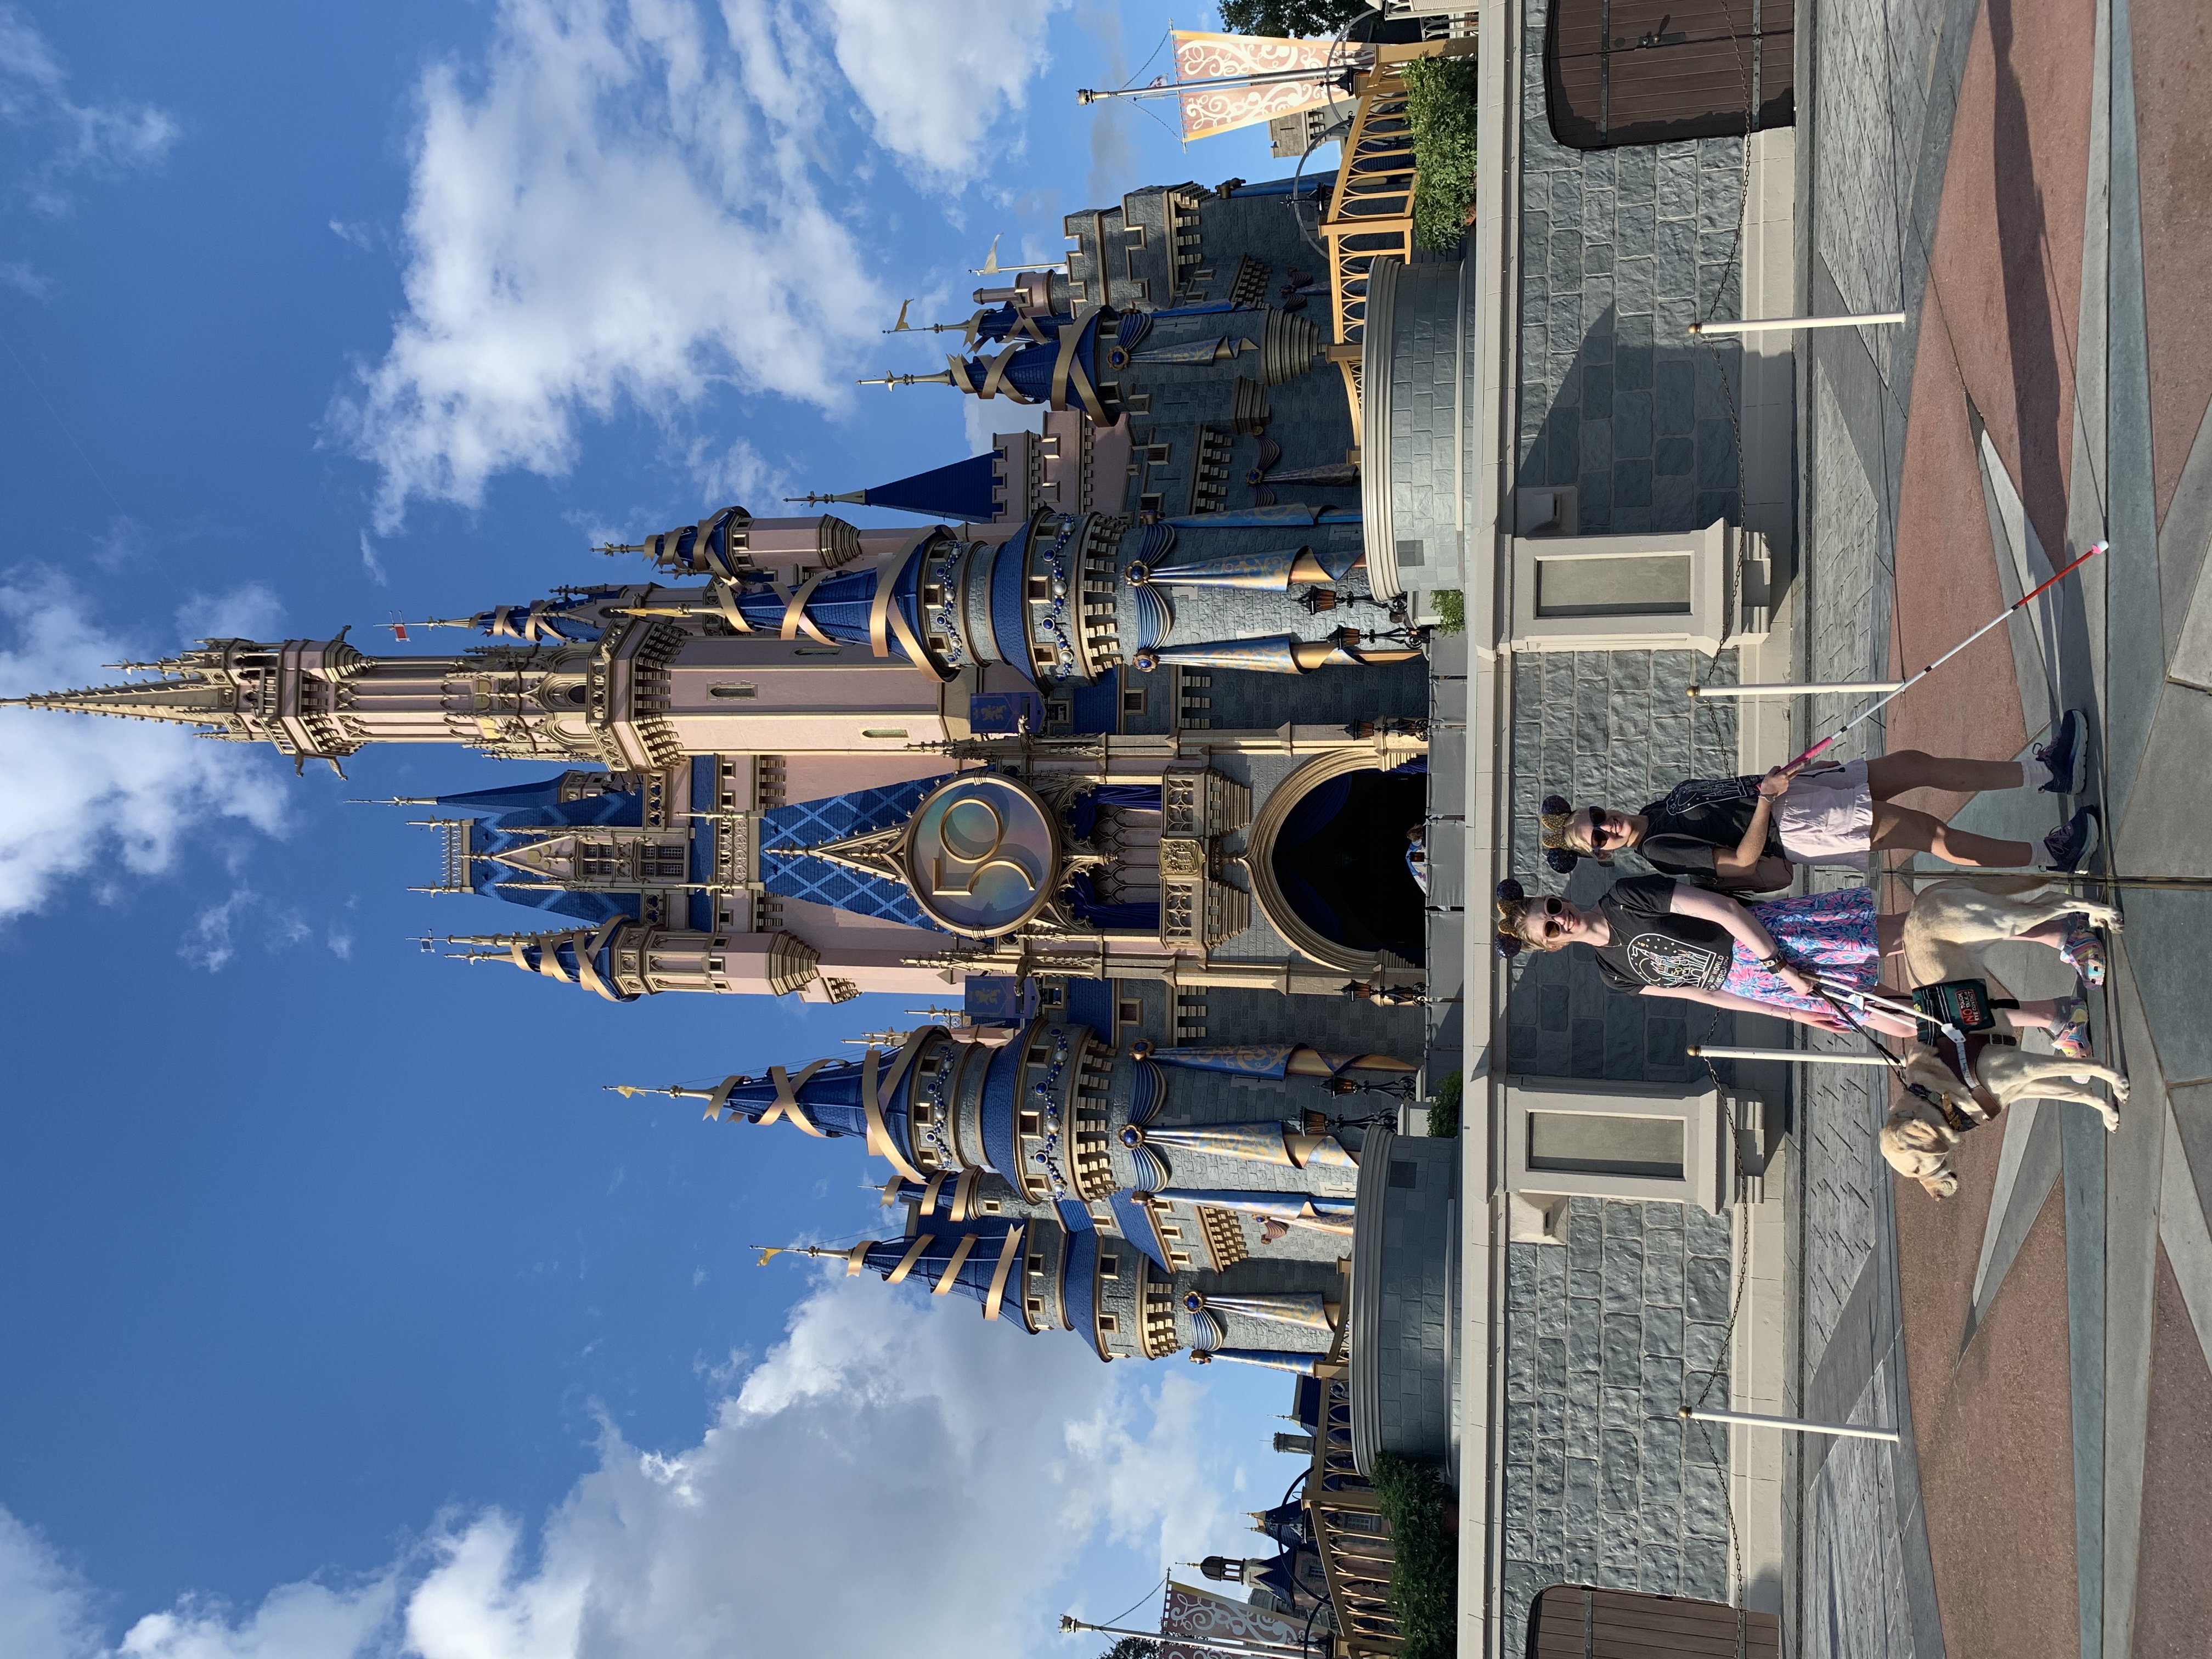 photo of case and cass in front of the cinderella castle in walt disney world's magic kingdom. they wear matching grey tshirts. cass wears a pink and blue patterned miniskirt and colorful crocs, and casey wears light pink shorts with grey sneakers. they pose in the style of the rare with flair cover art, with cass gripping romana's harness as ro faces left and casey holding her pink handled cane